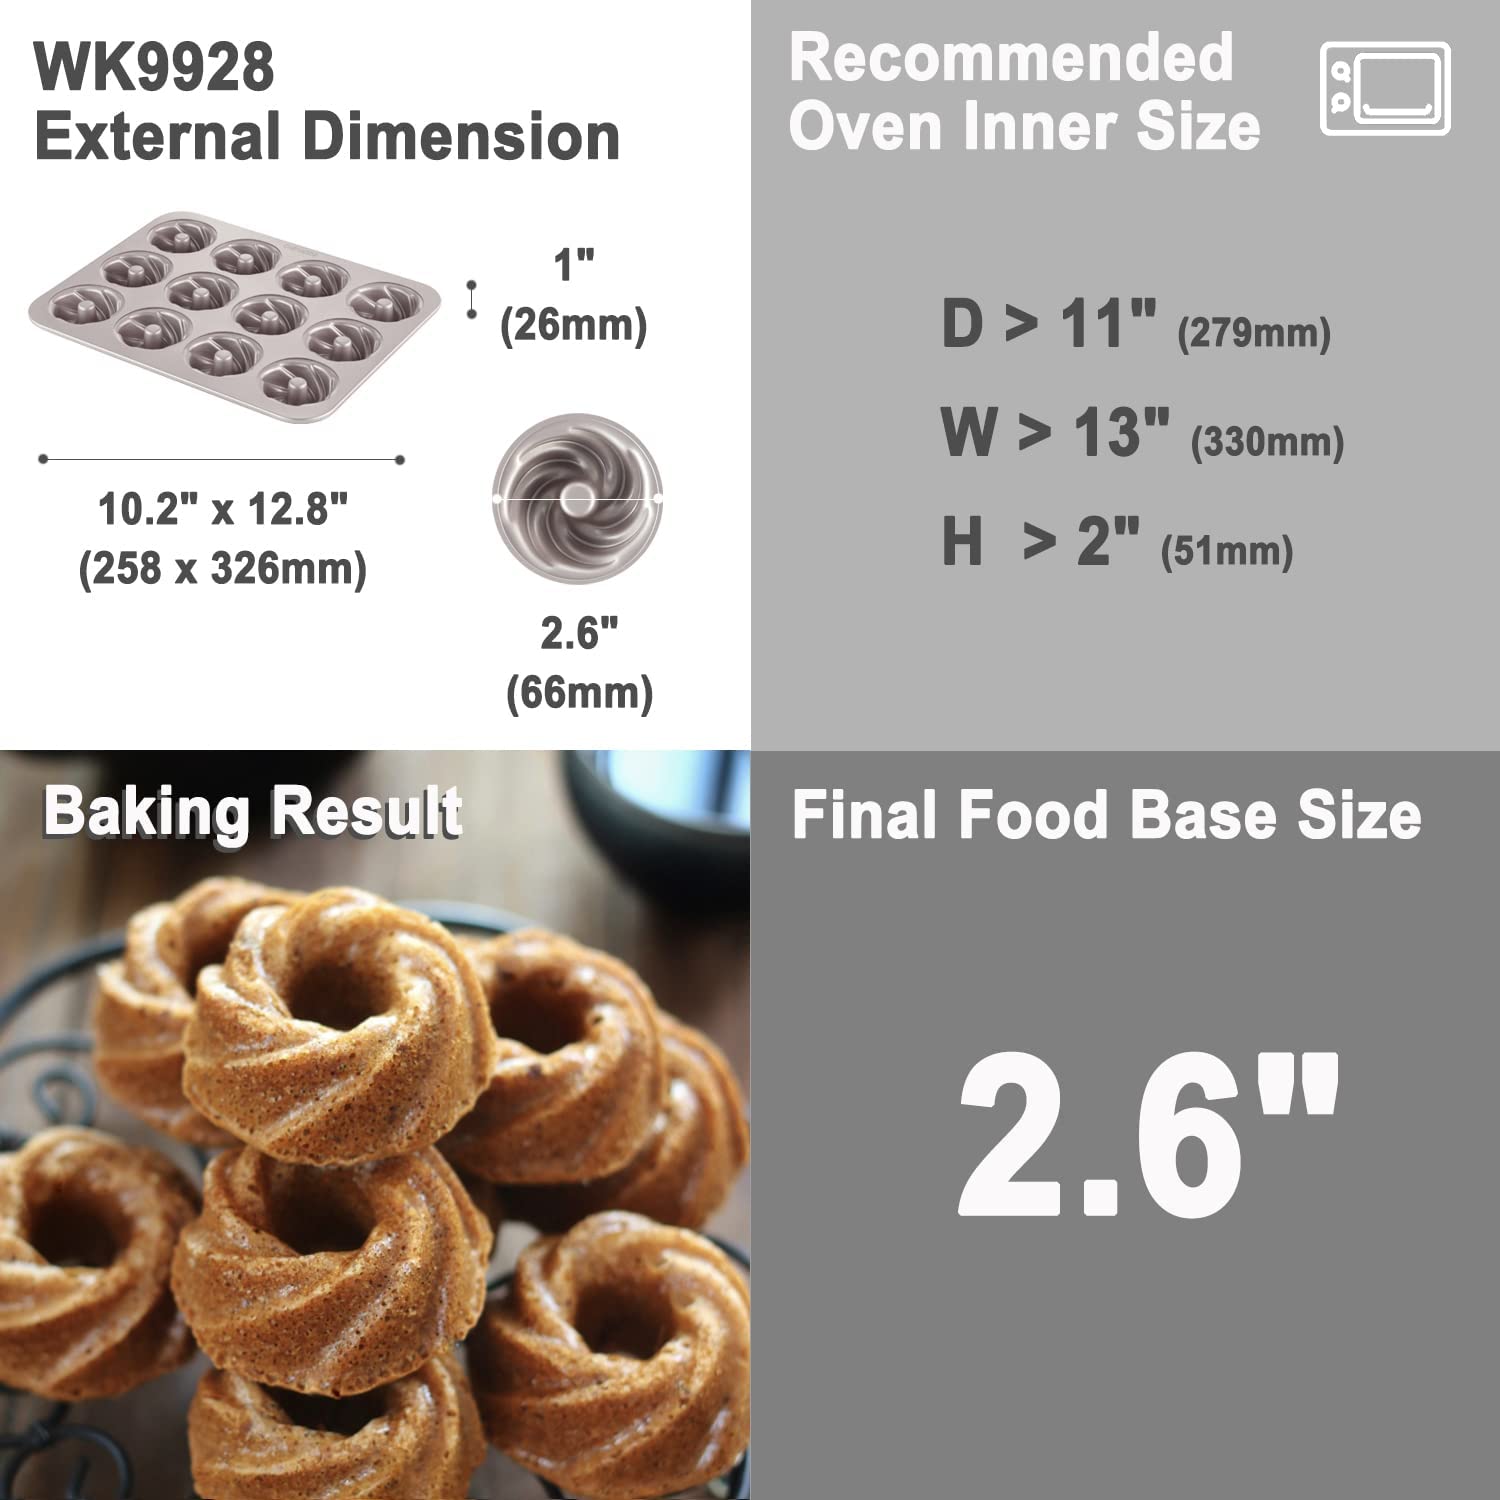 Cyclone Doughnut Cake Pan 12 Well - CHEFMADE official store